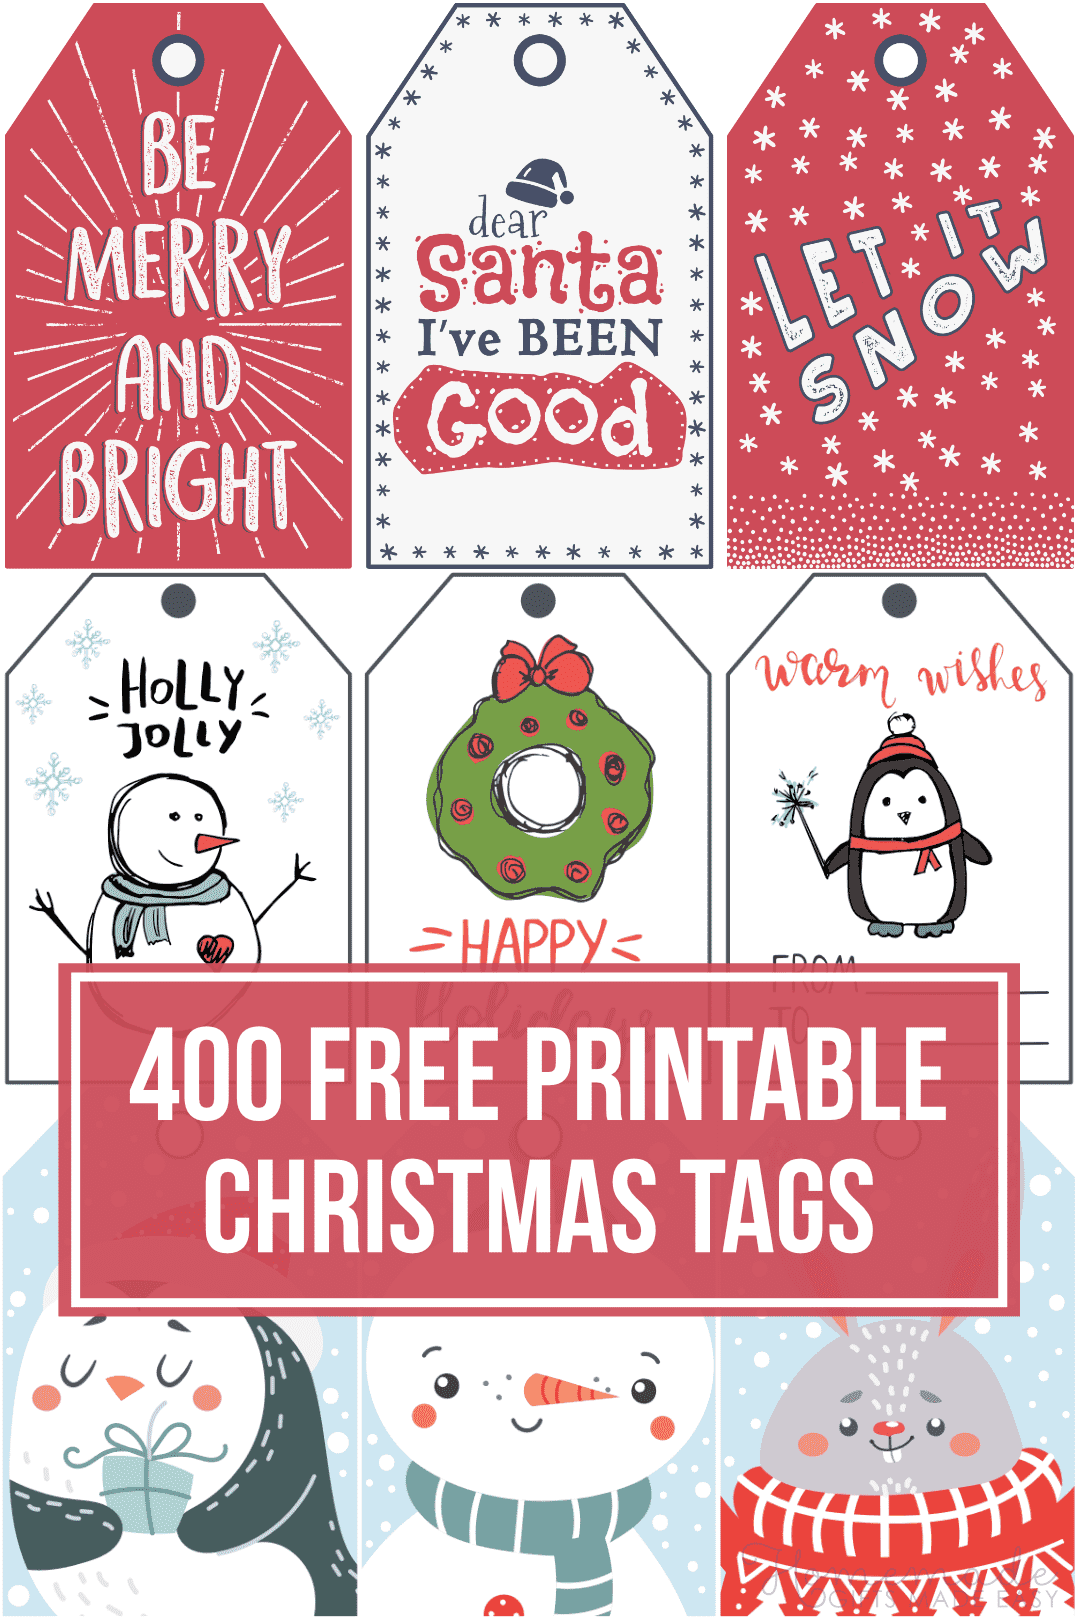 Details about   Lot of 4 Assorted New Christmas Gift Tags-8 per pack for a total of 32 gift tags 